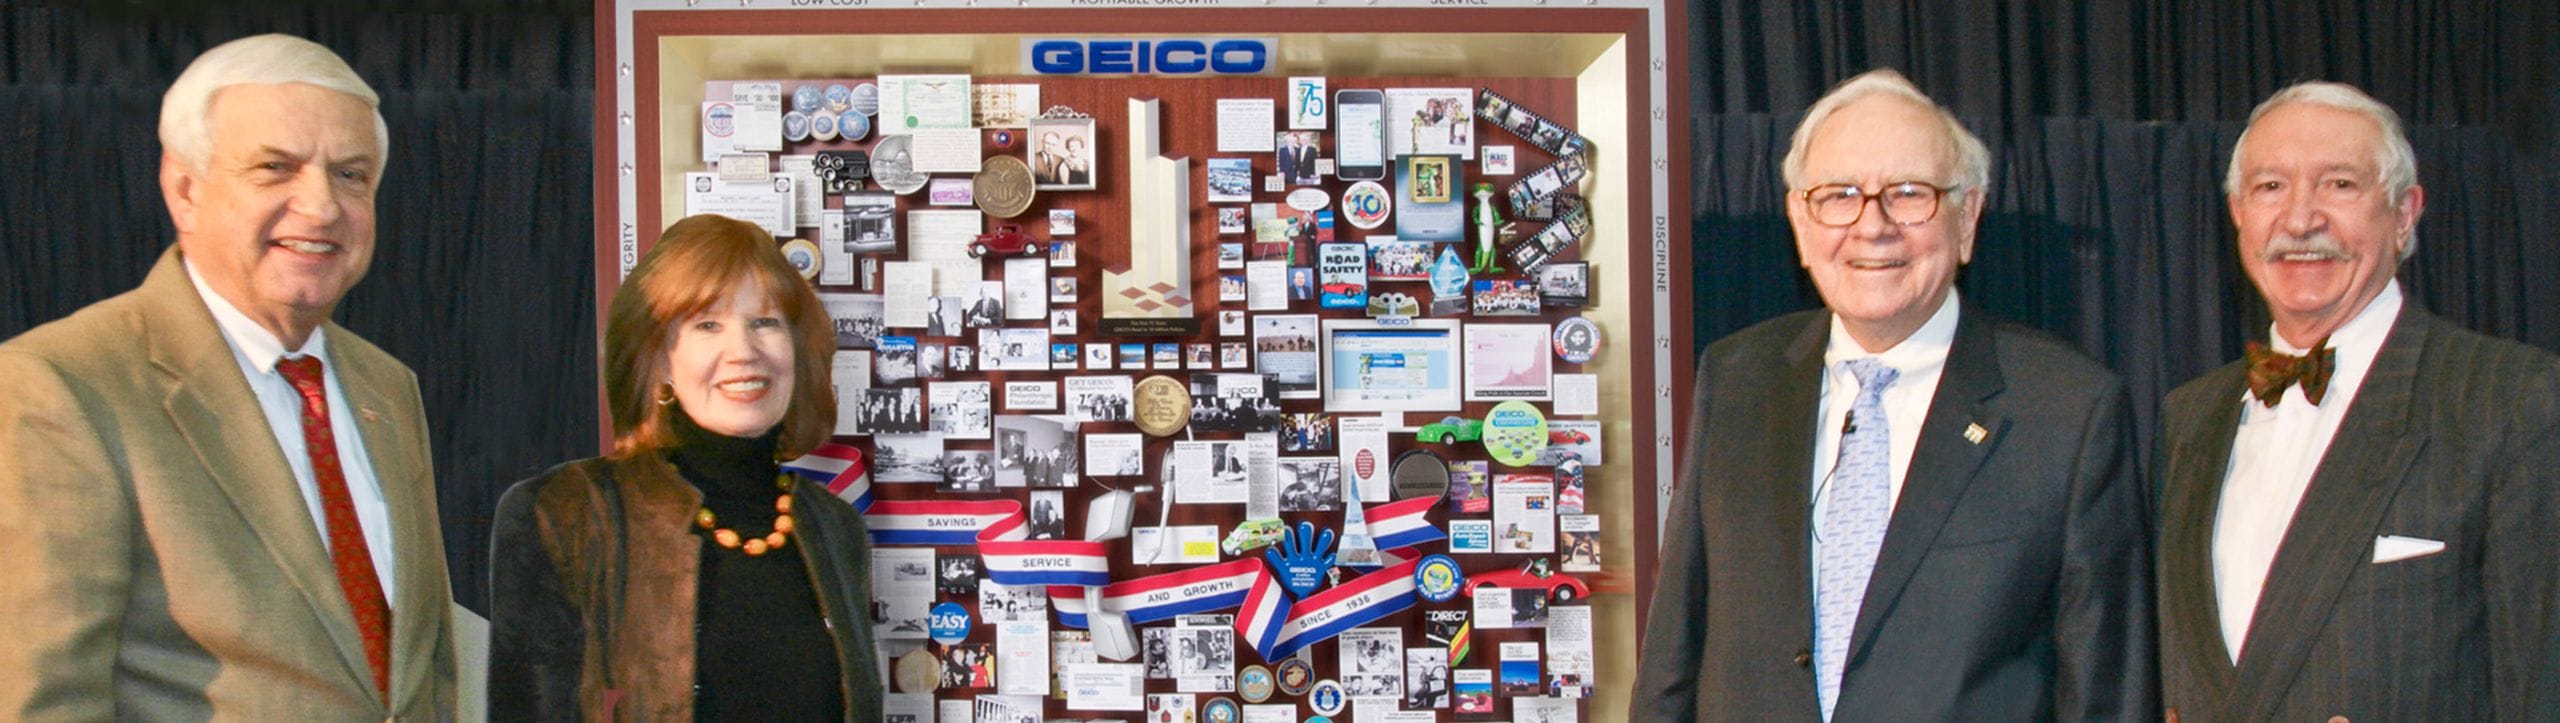 GEICO Unveiling 75th Anniversary scaled